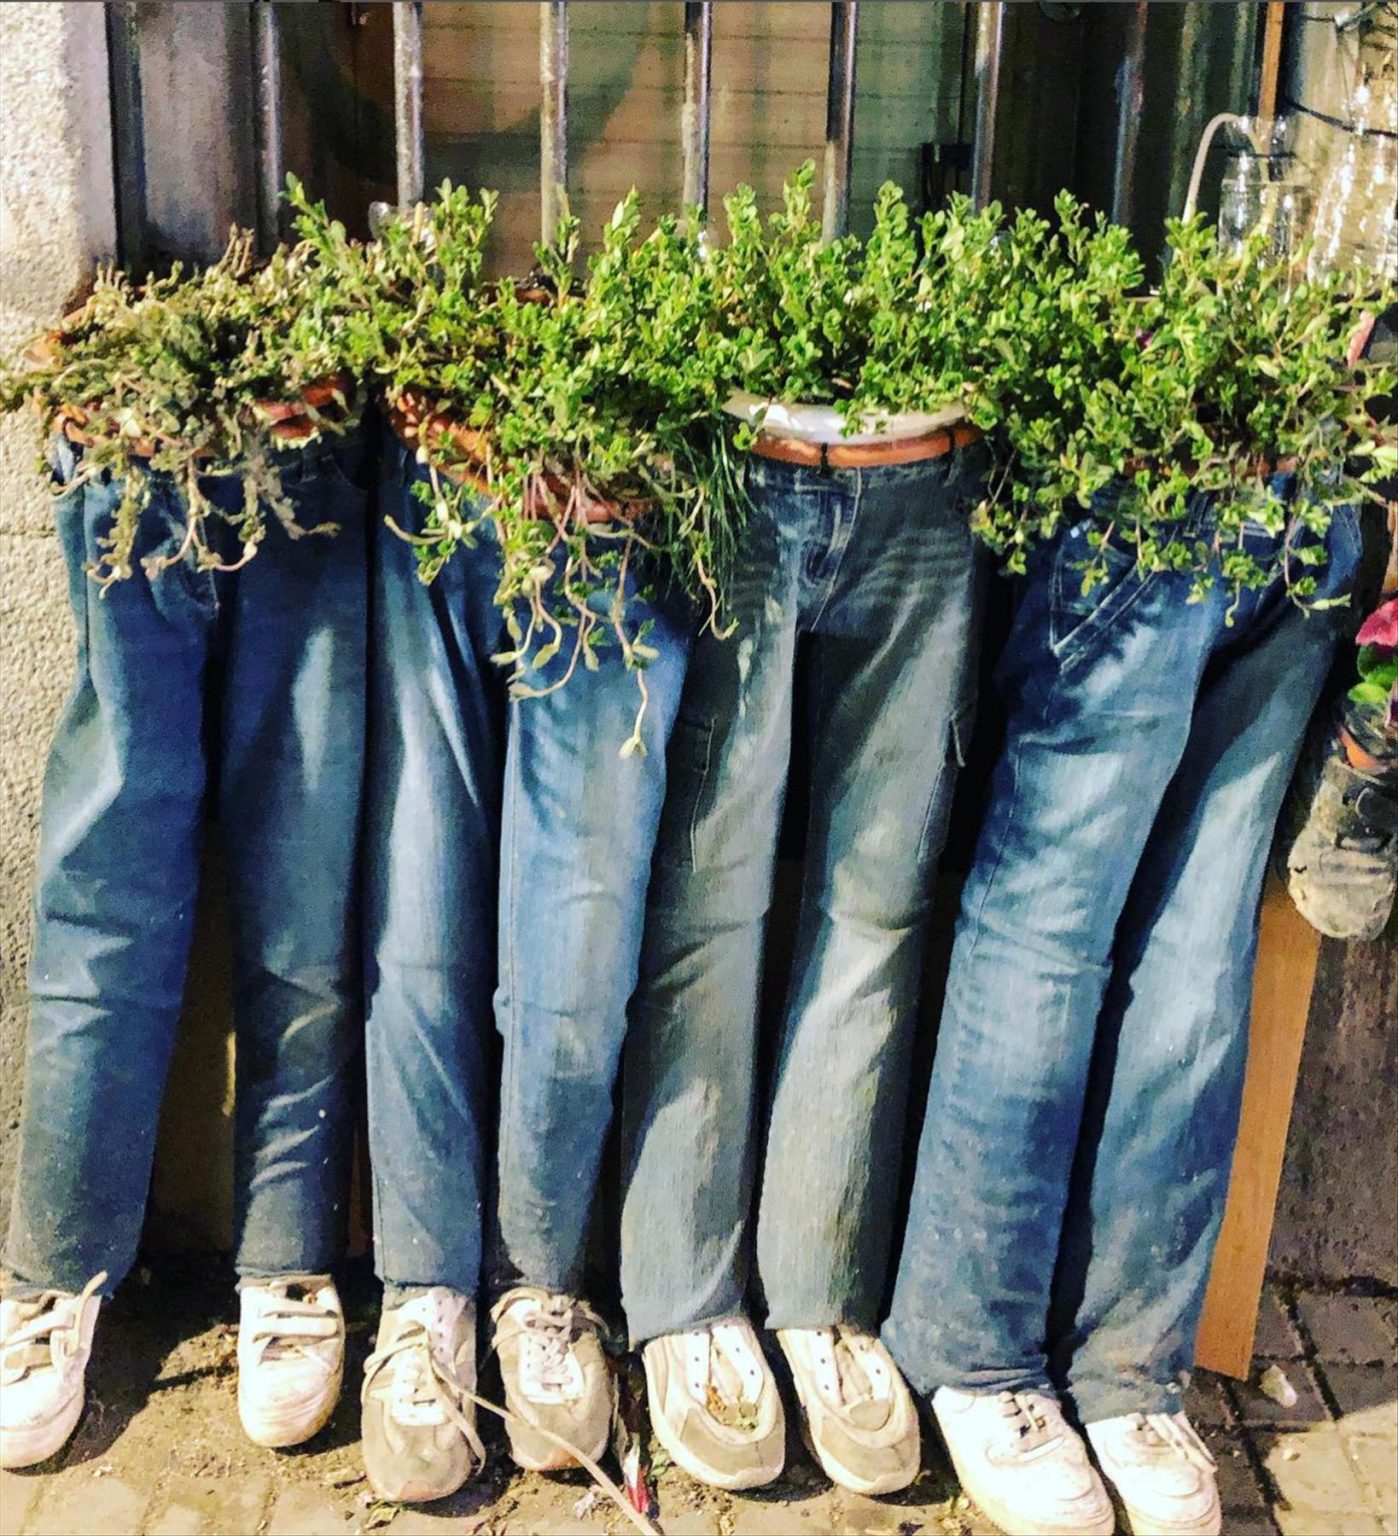 30 DIY plants in shoes: Recycled Footwear makes a Great Garden Planter